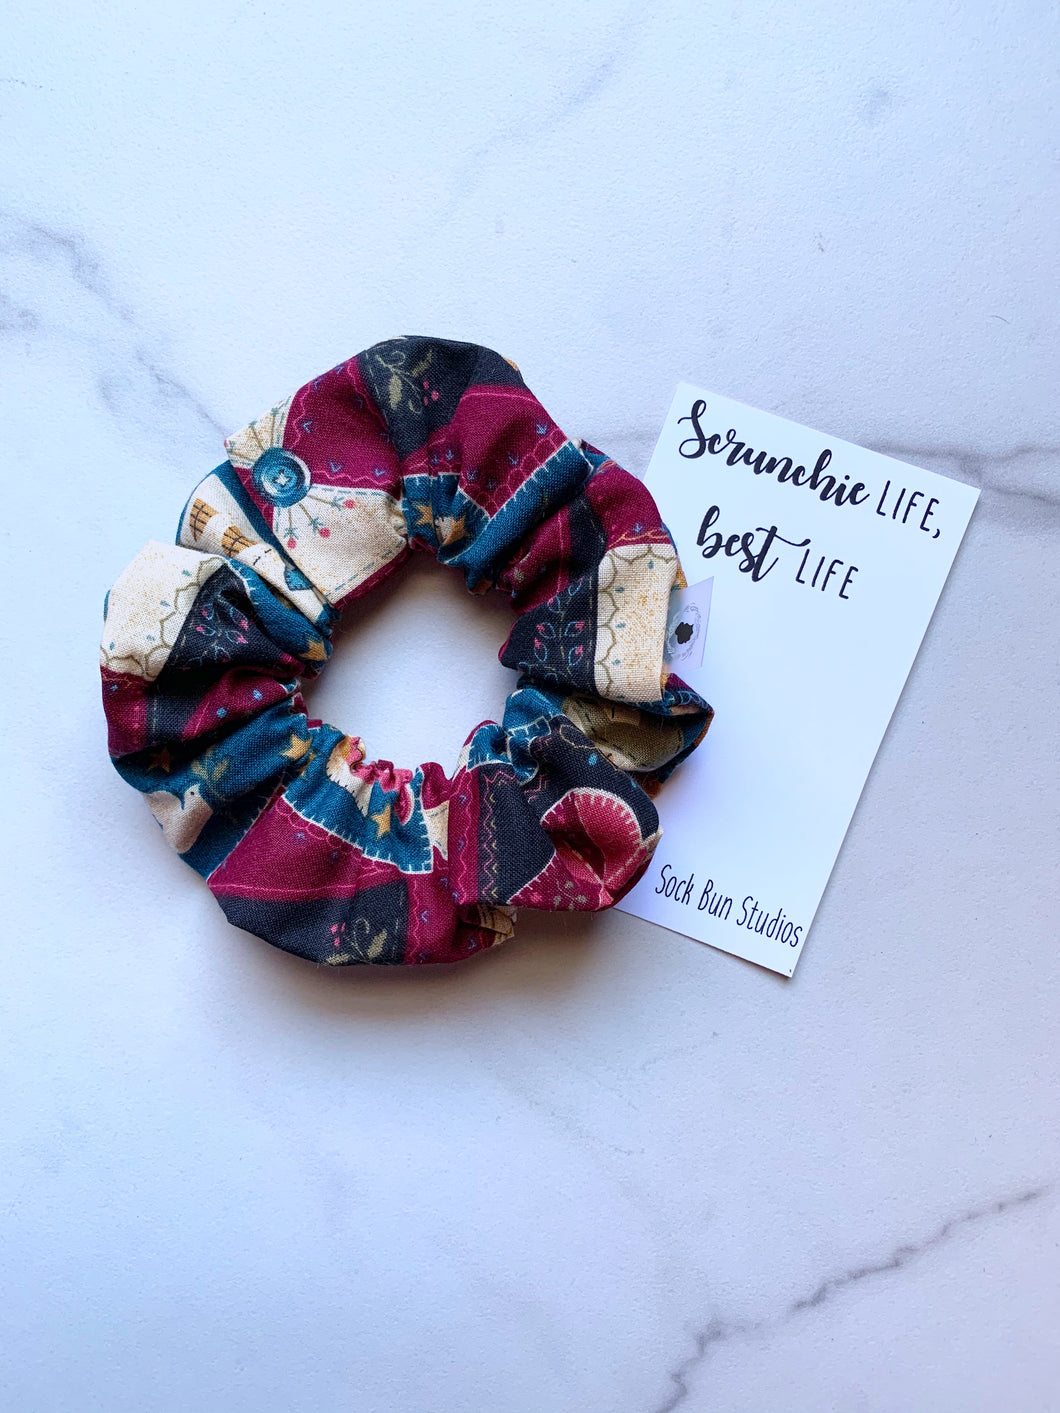 SALE Throwback Christmas Country Angel Quilt Scrunchie